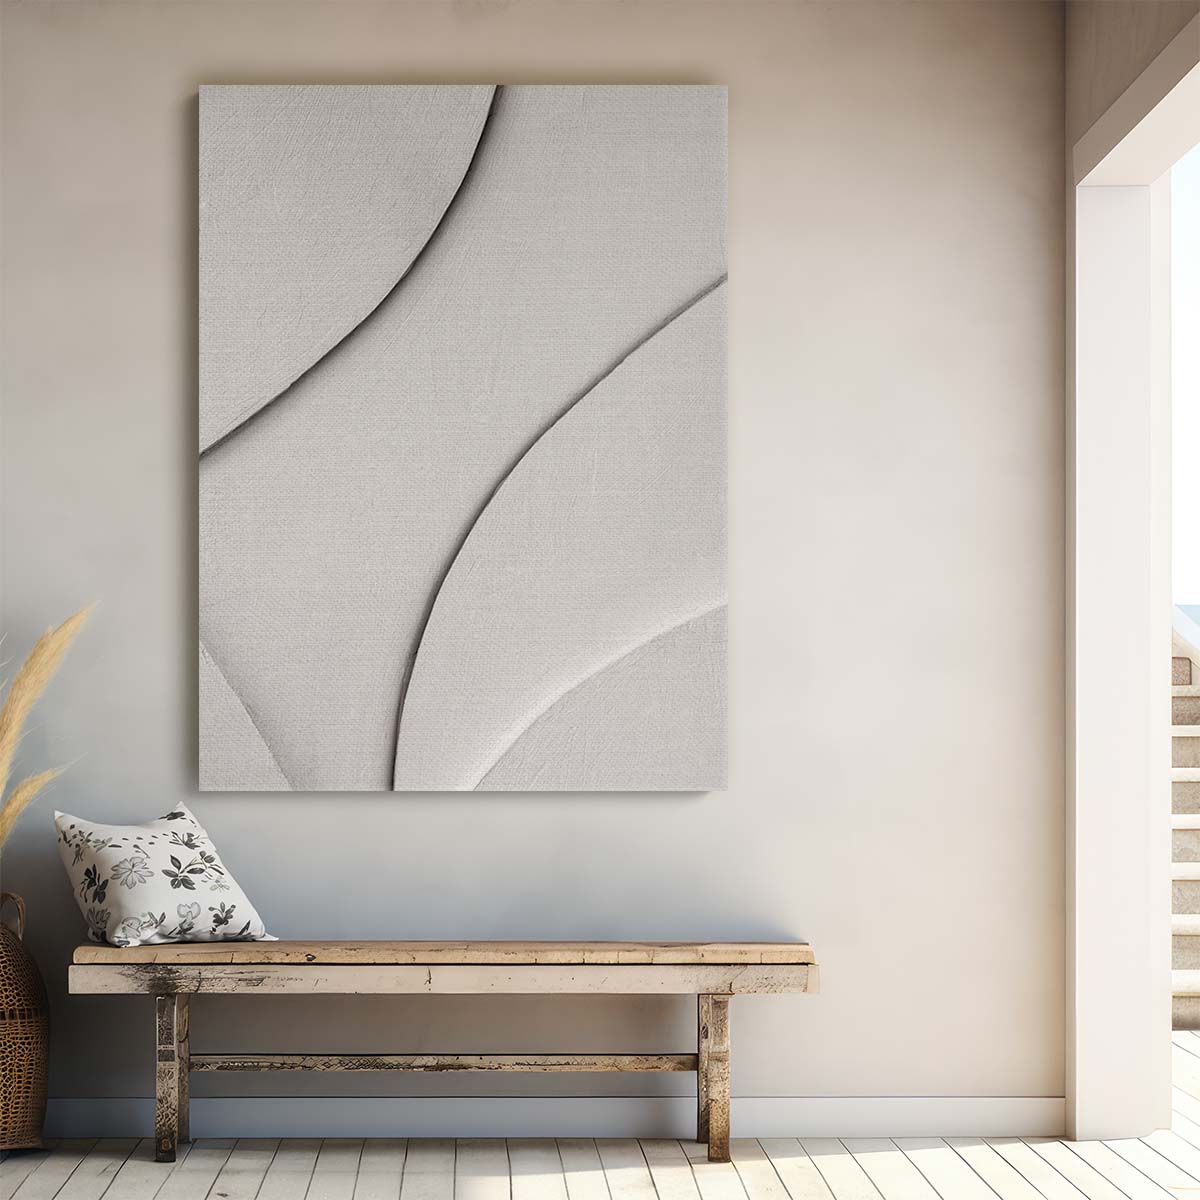 Abstract Scandinavian Monochrome Photography - Mareike Bohmer's Pastel Clay Collage Wall Art by Luxuriance Designs, made in USA